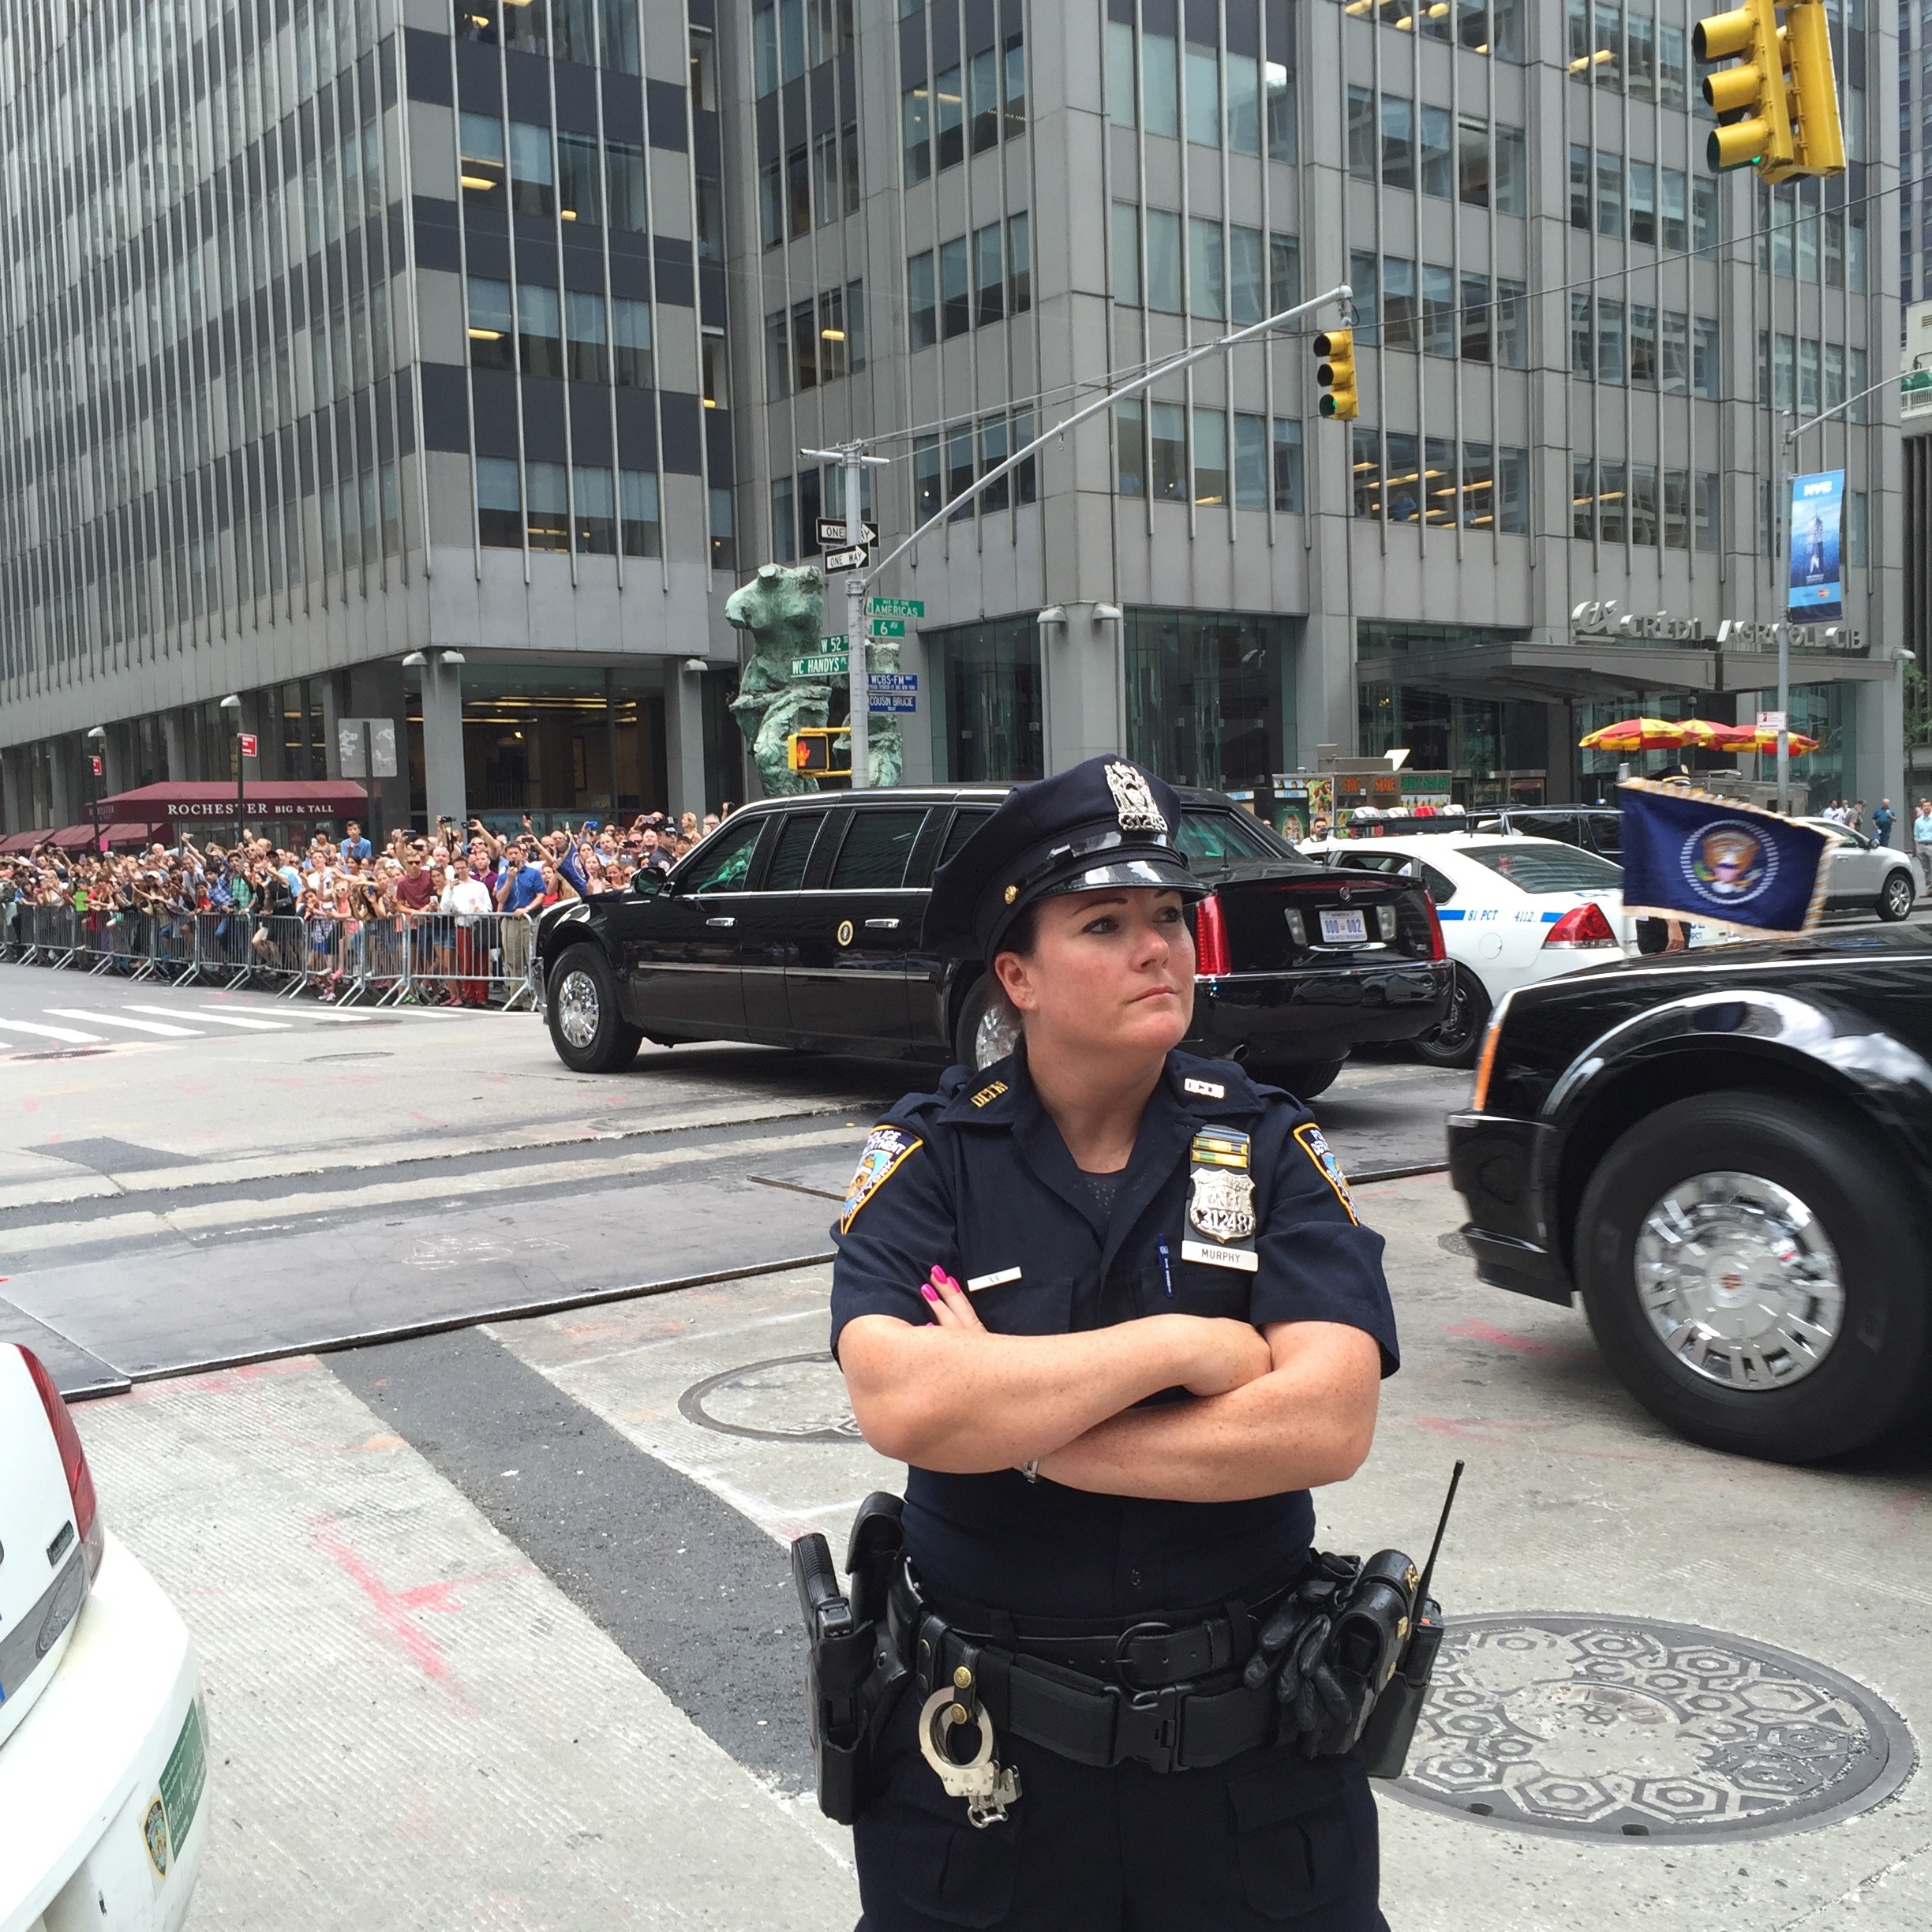 NYC Police Officer, 2015, digital photo